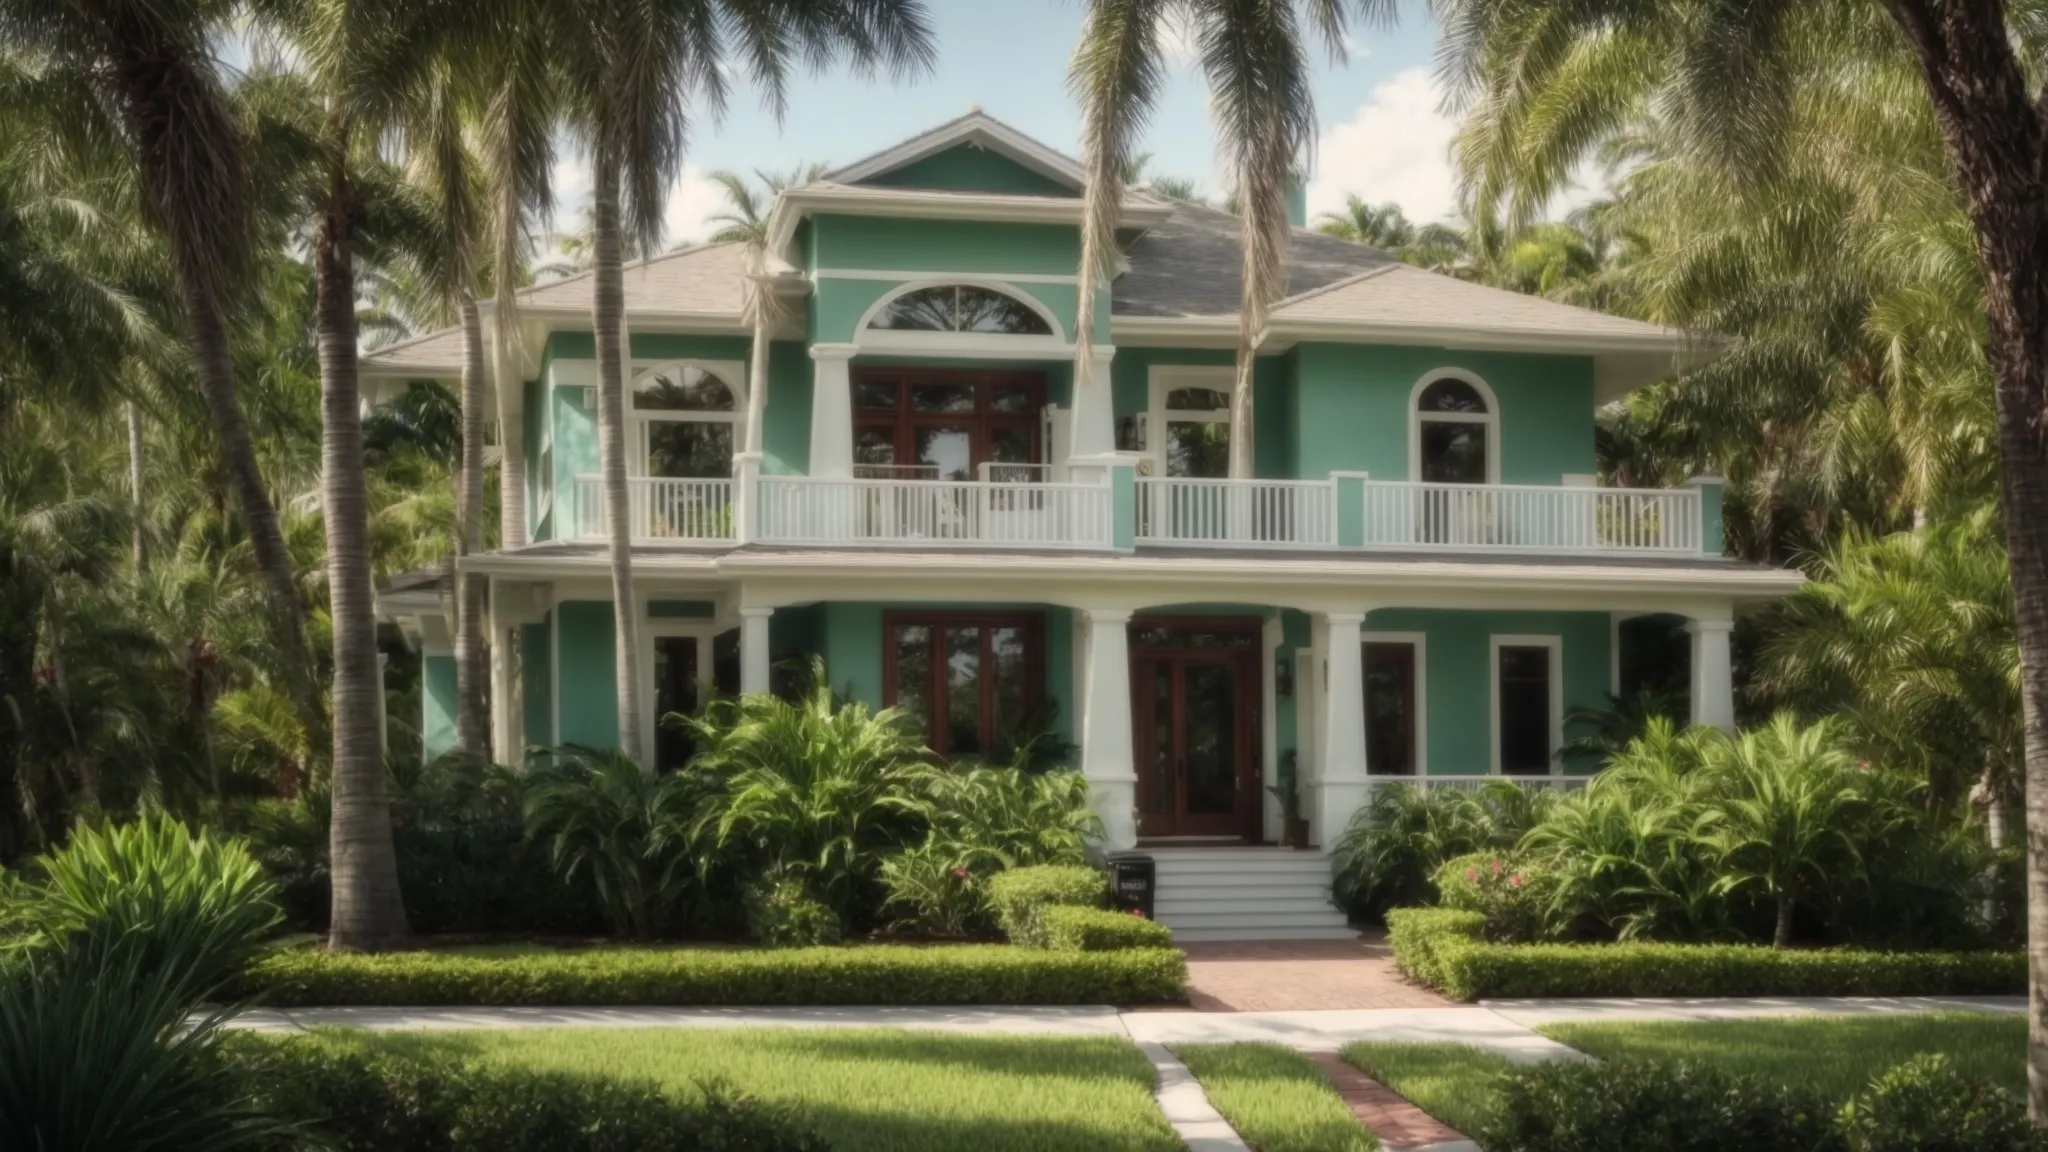 a pristine house stands out vibrantly against the lush green backdrop of a tampa neighborhood, epitomizing enhanced curb appeal and financial wisdom.